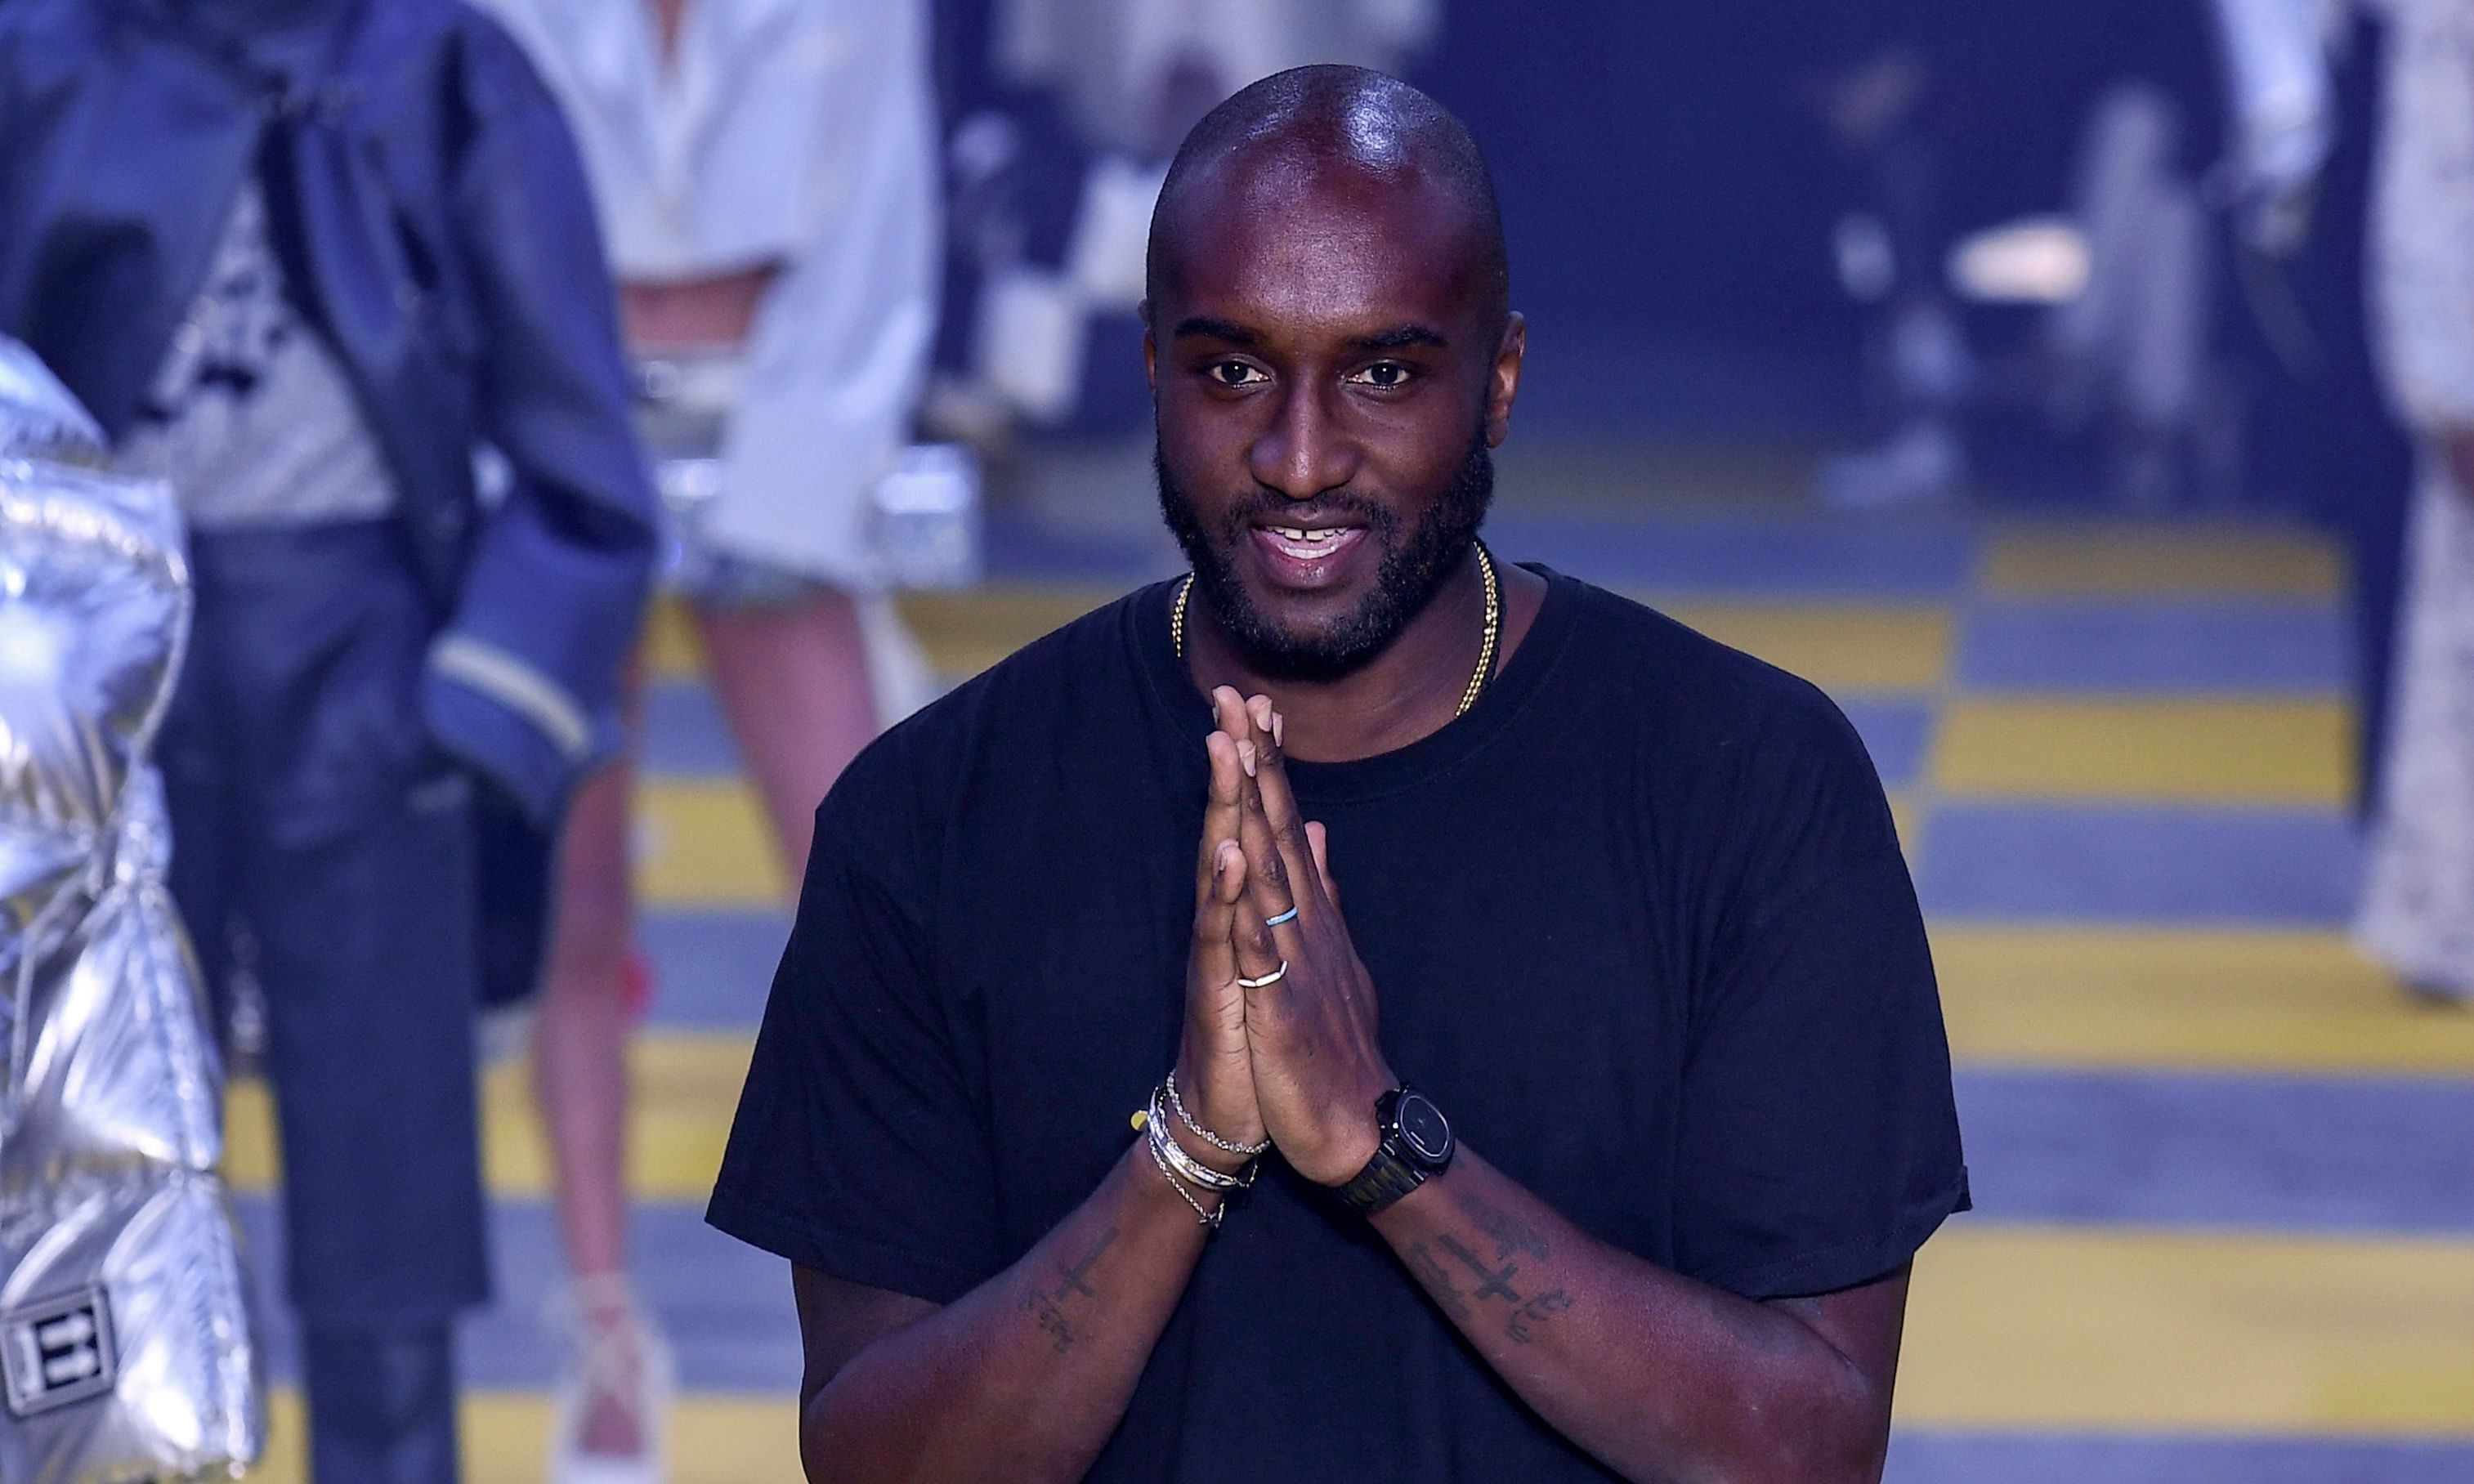 OFF-WHITE' CREATOR VIRGIL ABLOH JOINS THE LOUIS VUITTON FAMILY - Hypress  Live